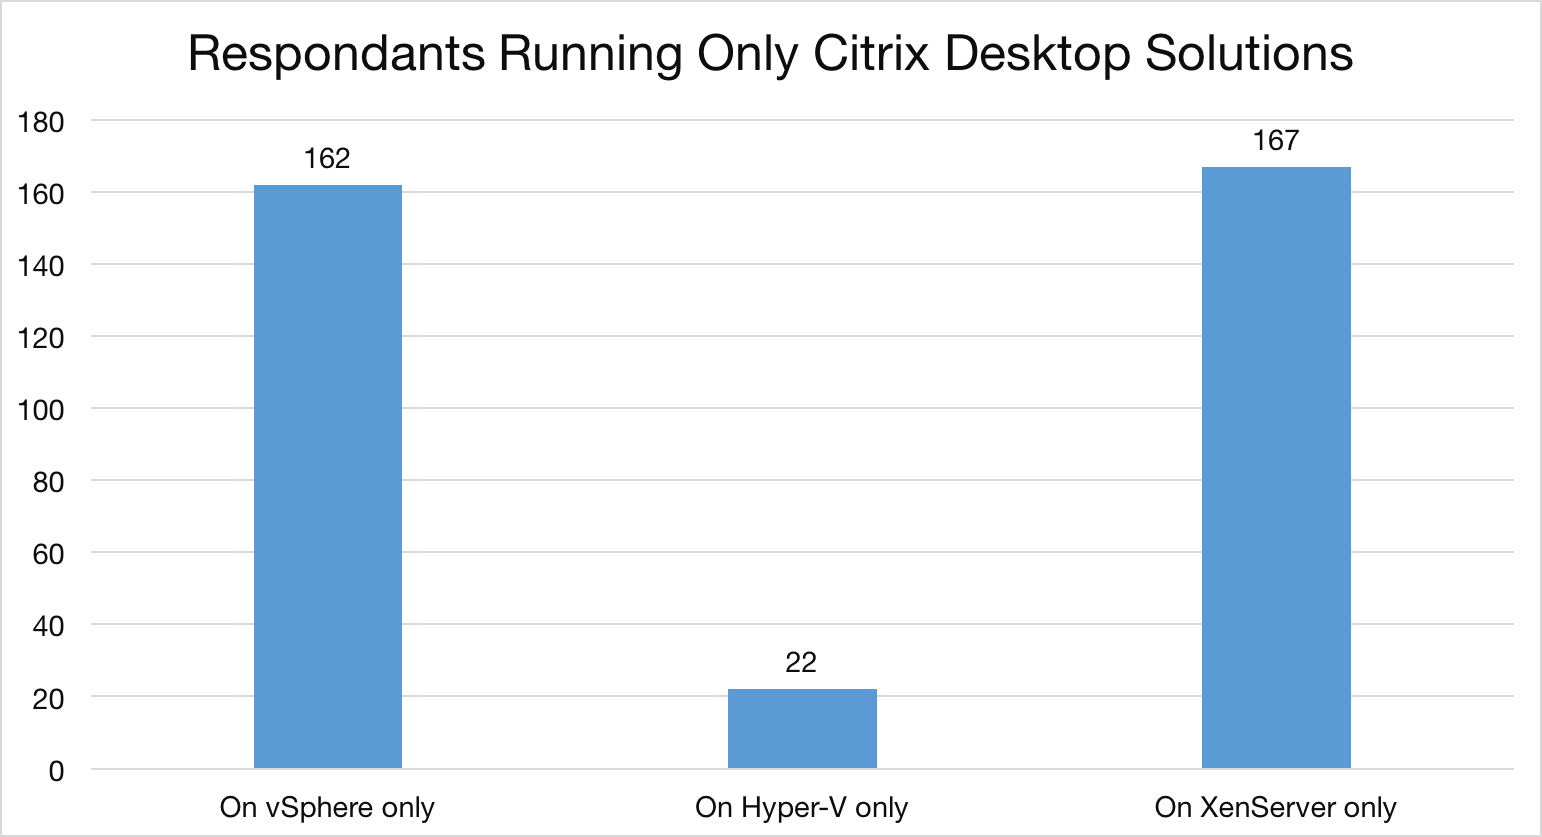 Hypervisor usage where a respondent is using Citrix desktop solutions only